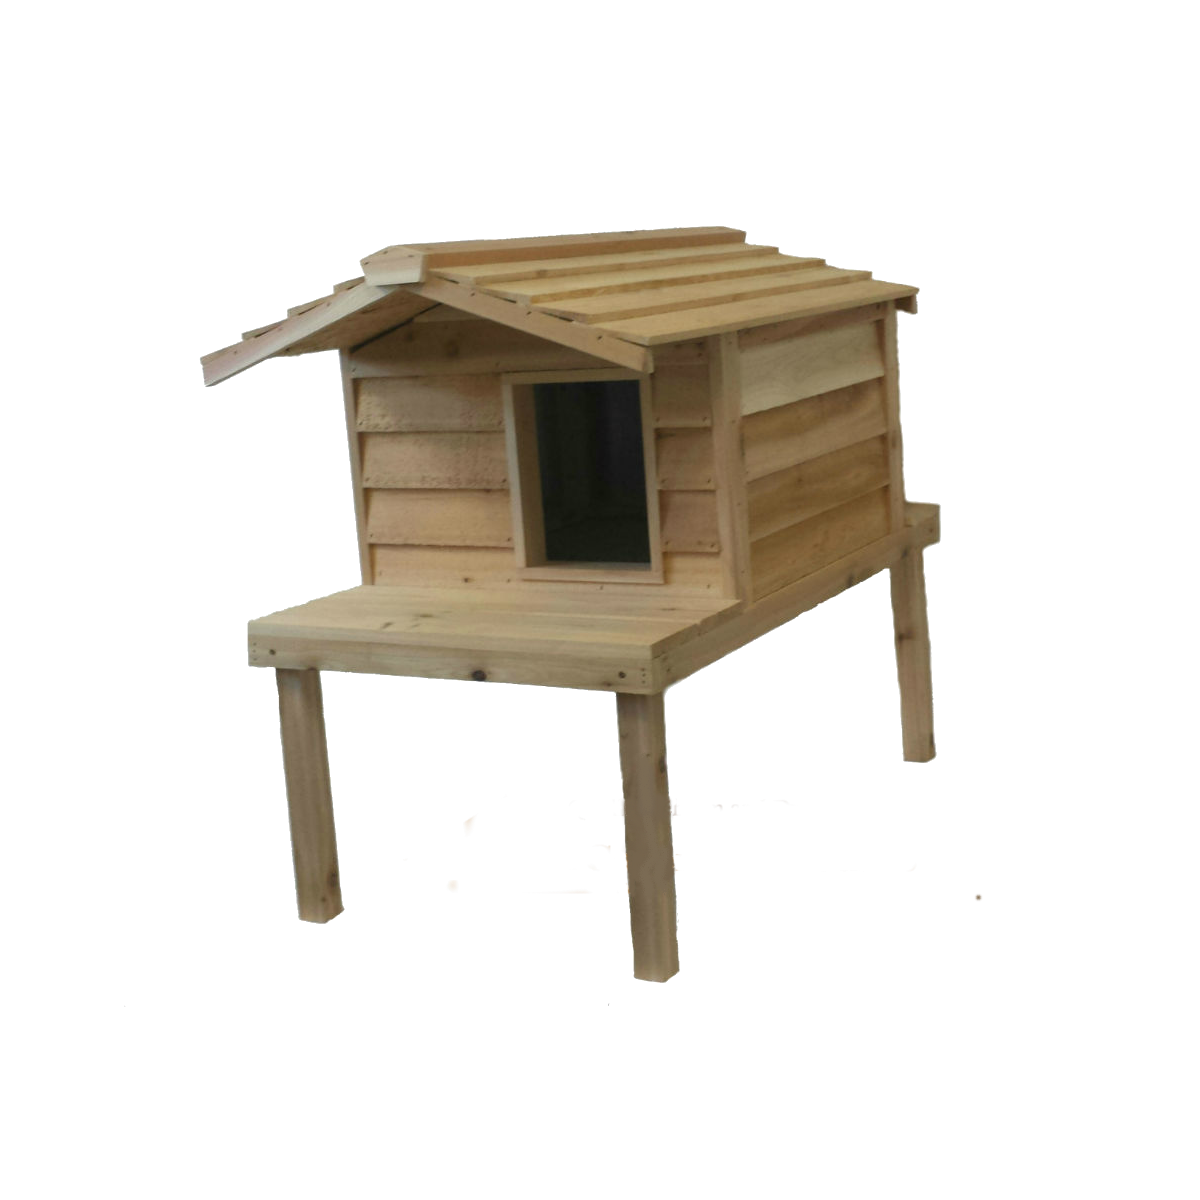 small dog house outdoor